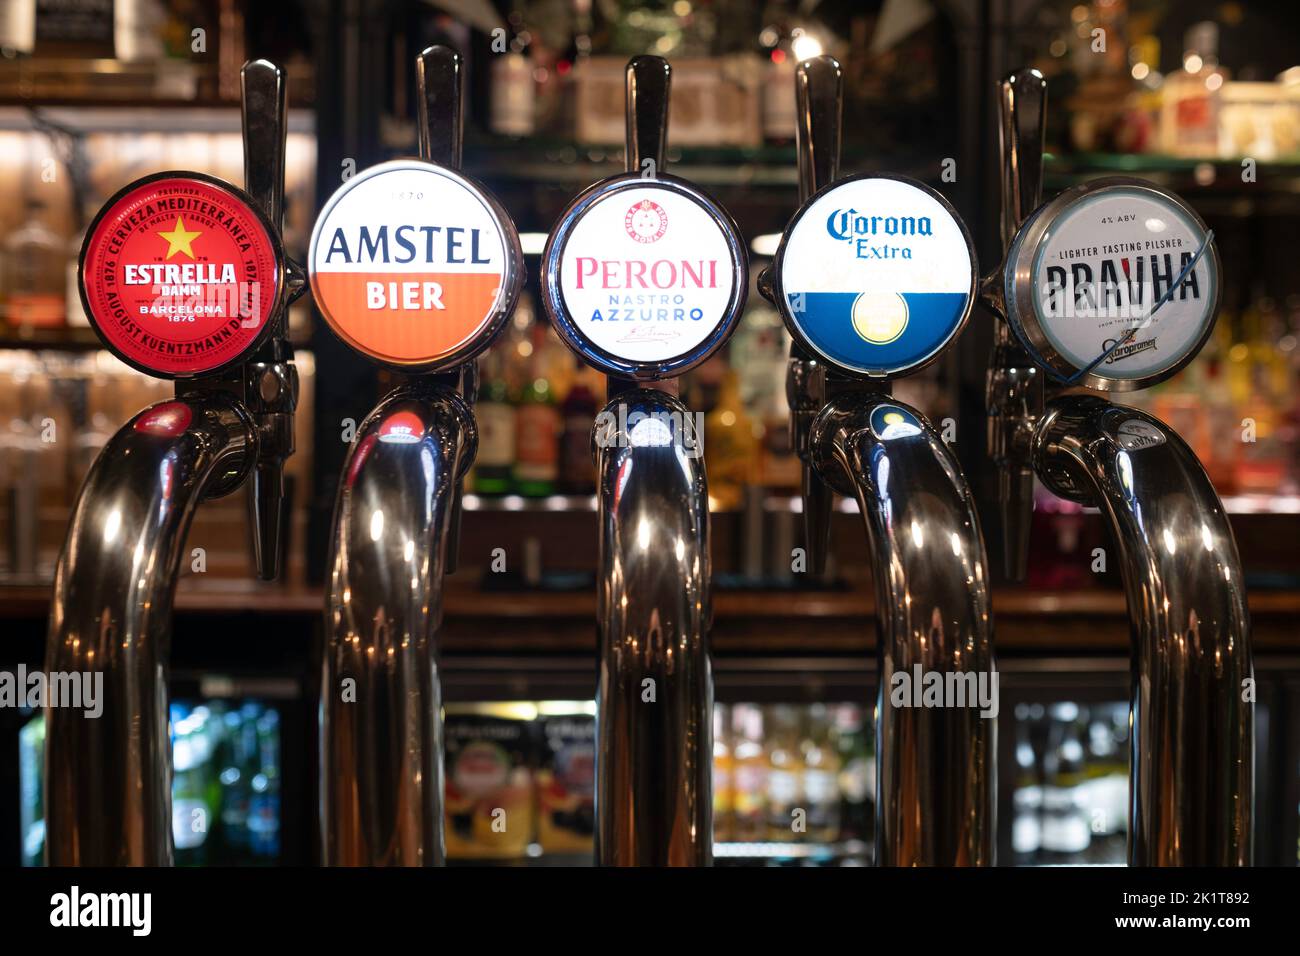 Stainless steel beer taps, craft beer in an English pub, Estrella, Amstel, Peroni, Corona and Pravha signs. Narrow depth of field Stock Photo